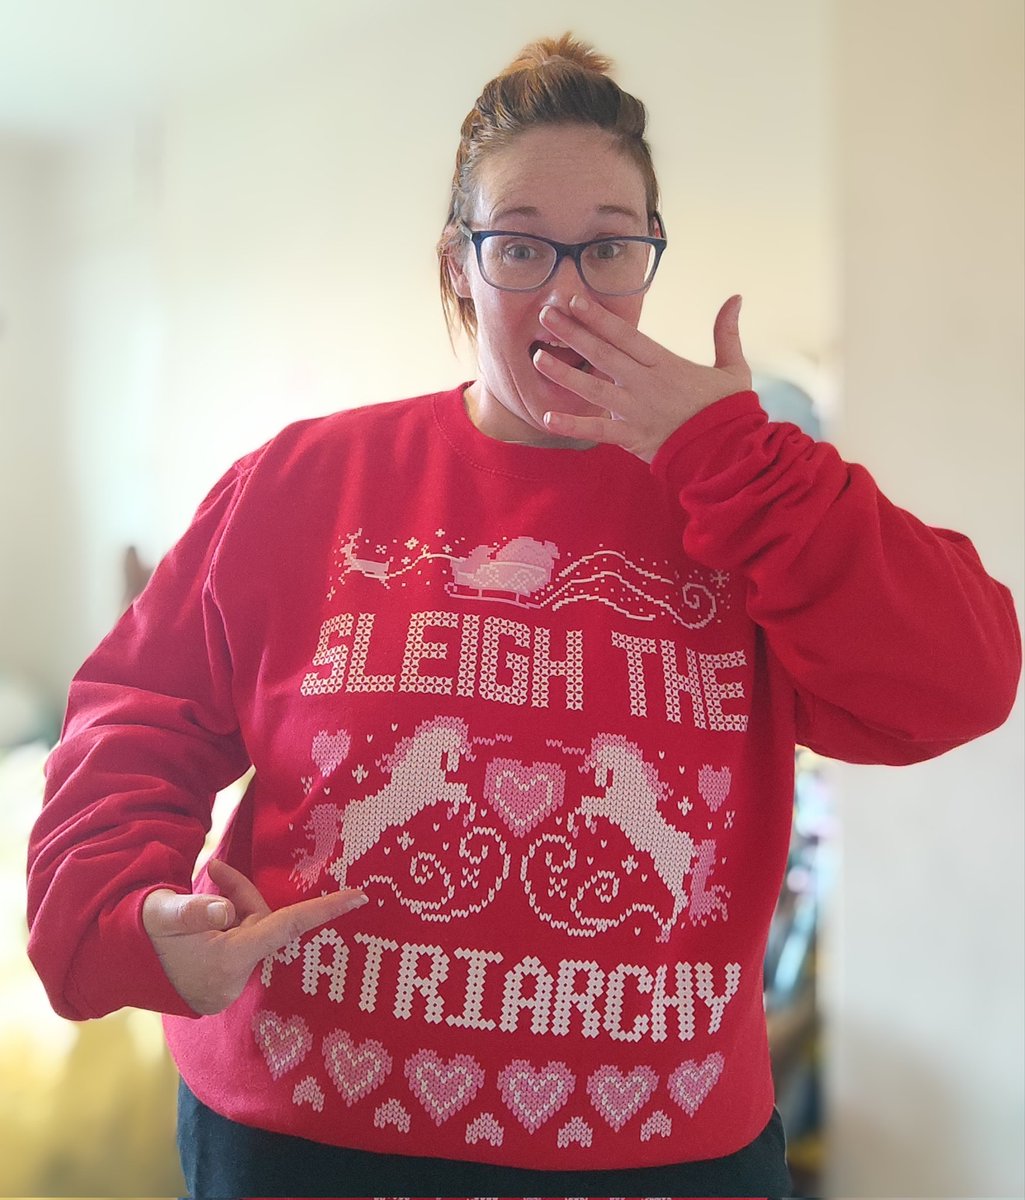 'Tis the season for a new Christmas jumper & continued Patriarchal slaying ofc 😉 #christmasjumper #uglysweater #smashpatriarchy